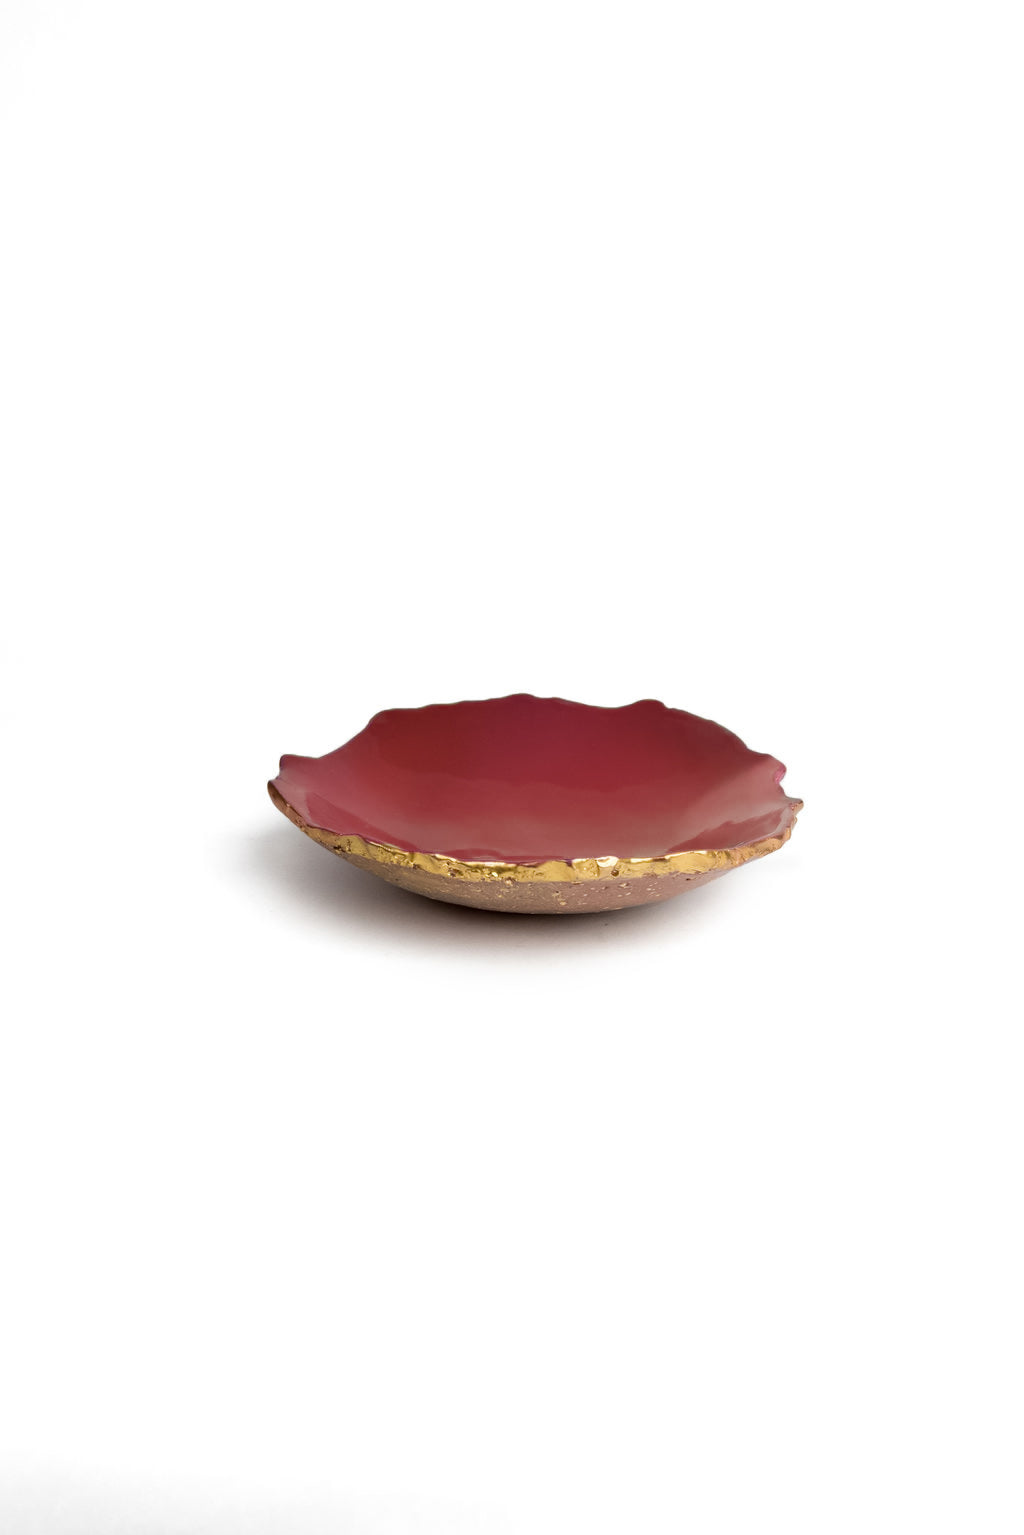 Red And Gold Bowl With Rough Edge